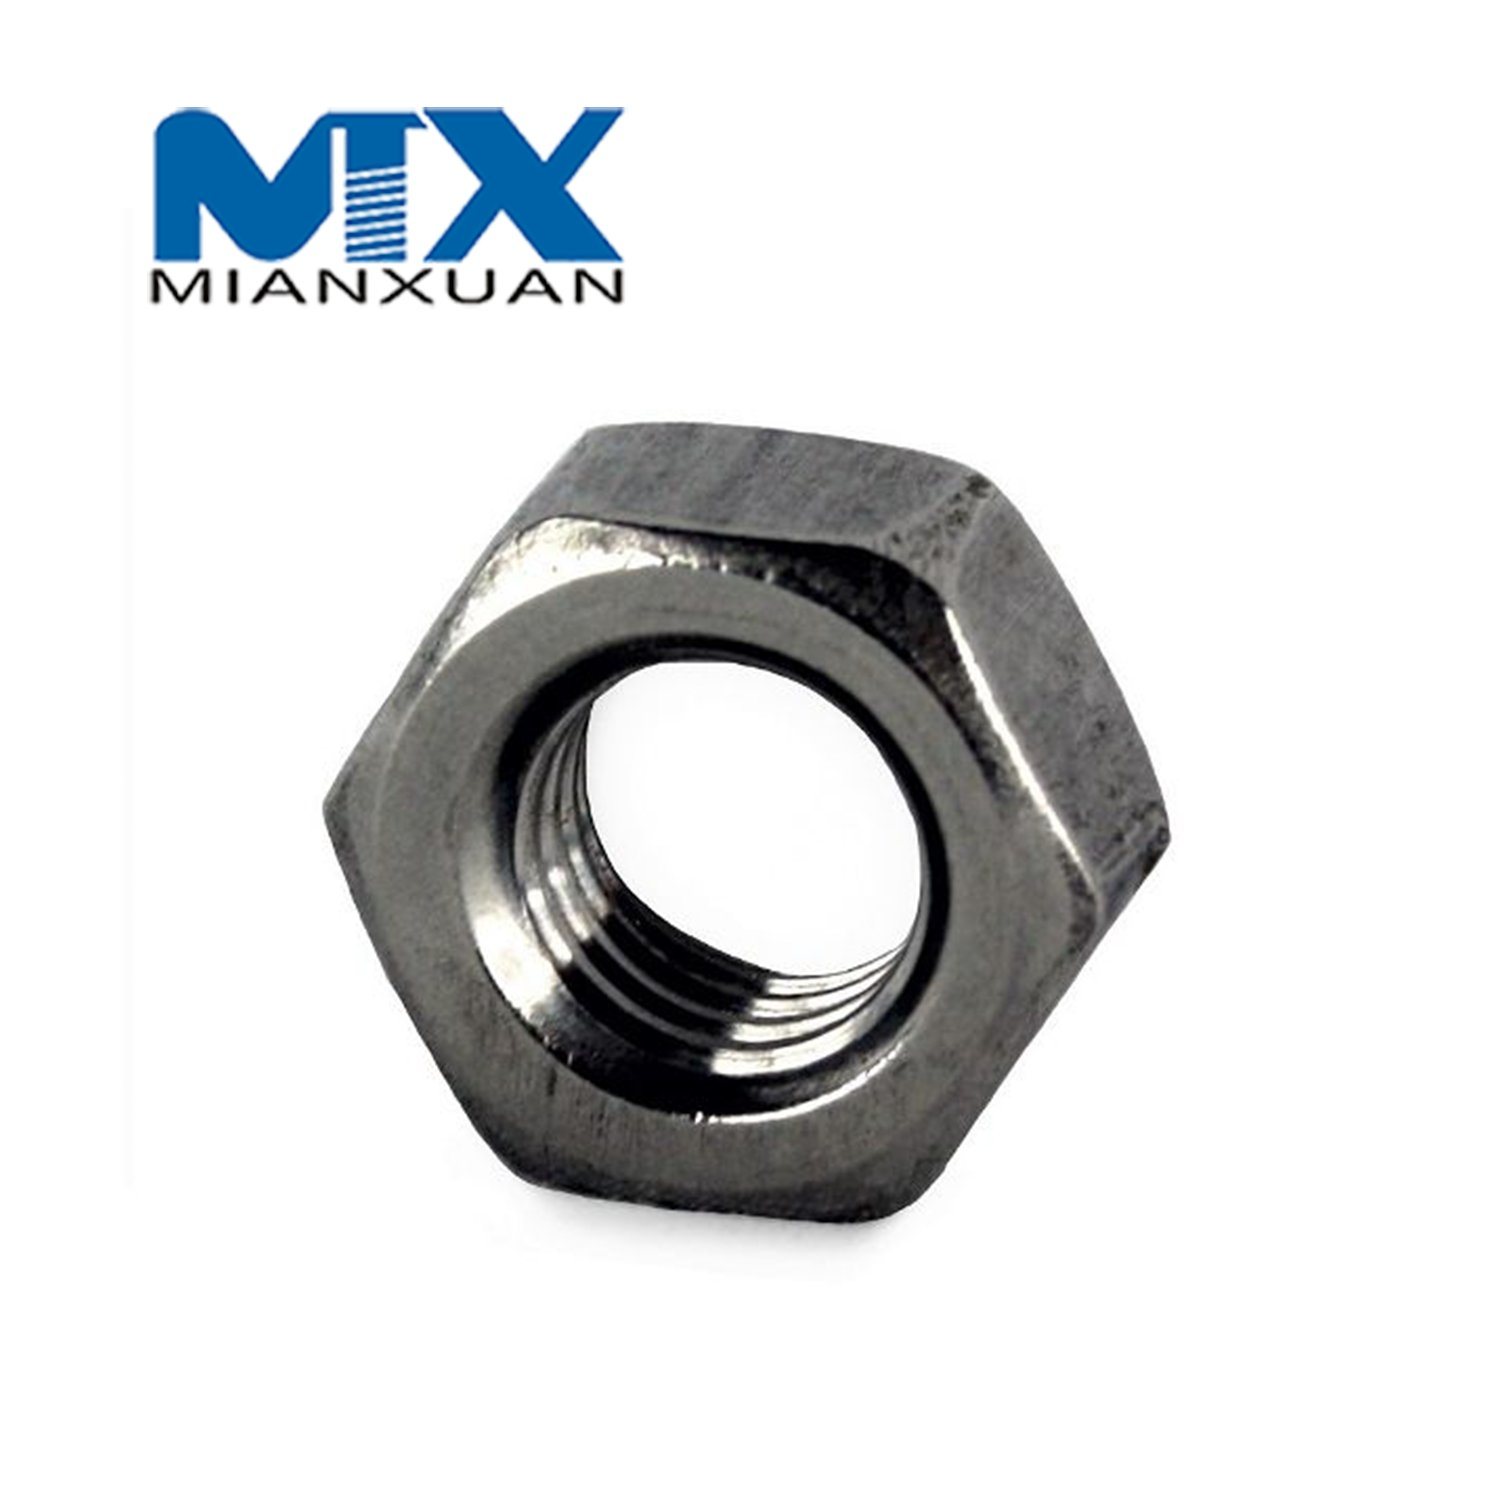 Stainless A2 A4 304 316 A2-70 A2-80 Hex Nut ISO4032 Hexagon Nut 4032 M24 M30 M36 M42 M48